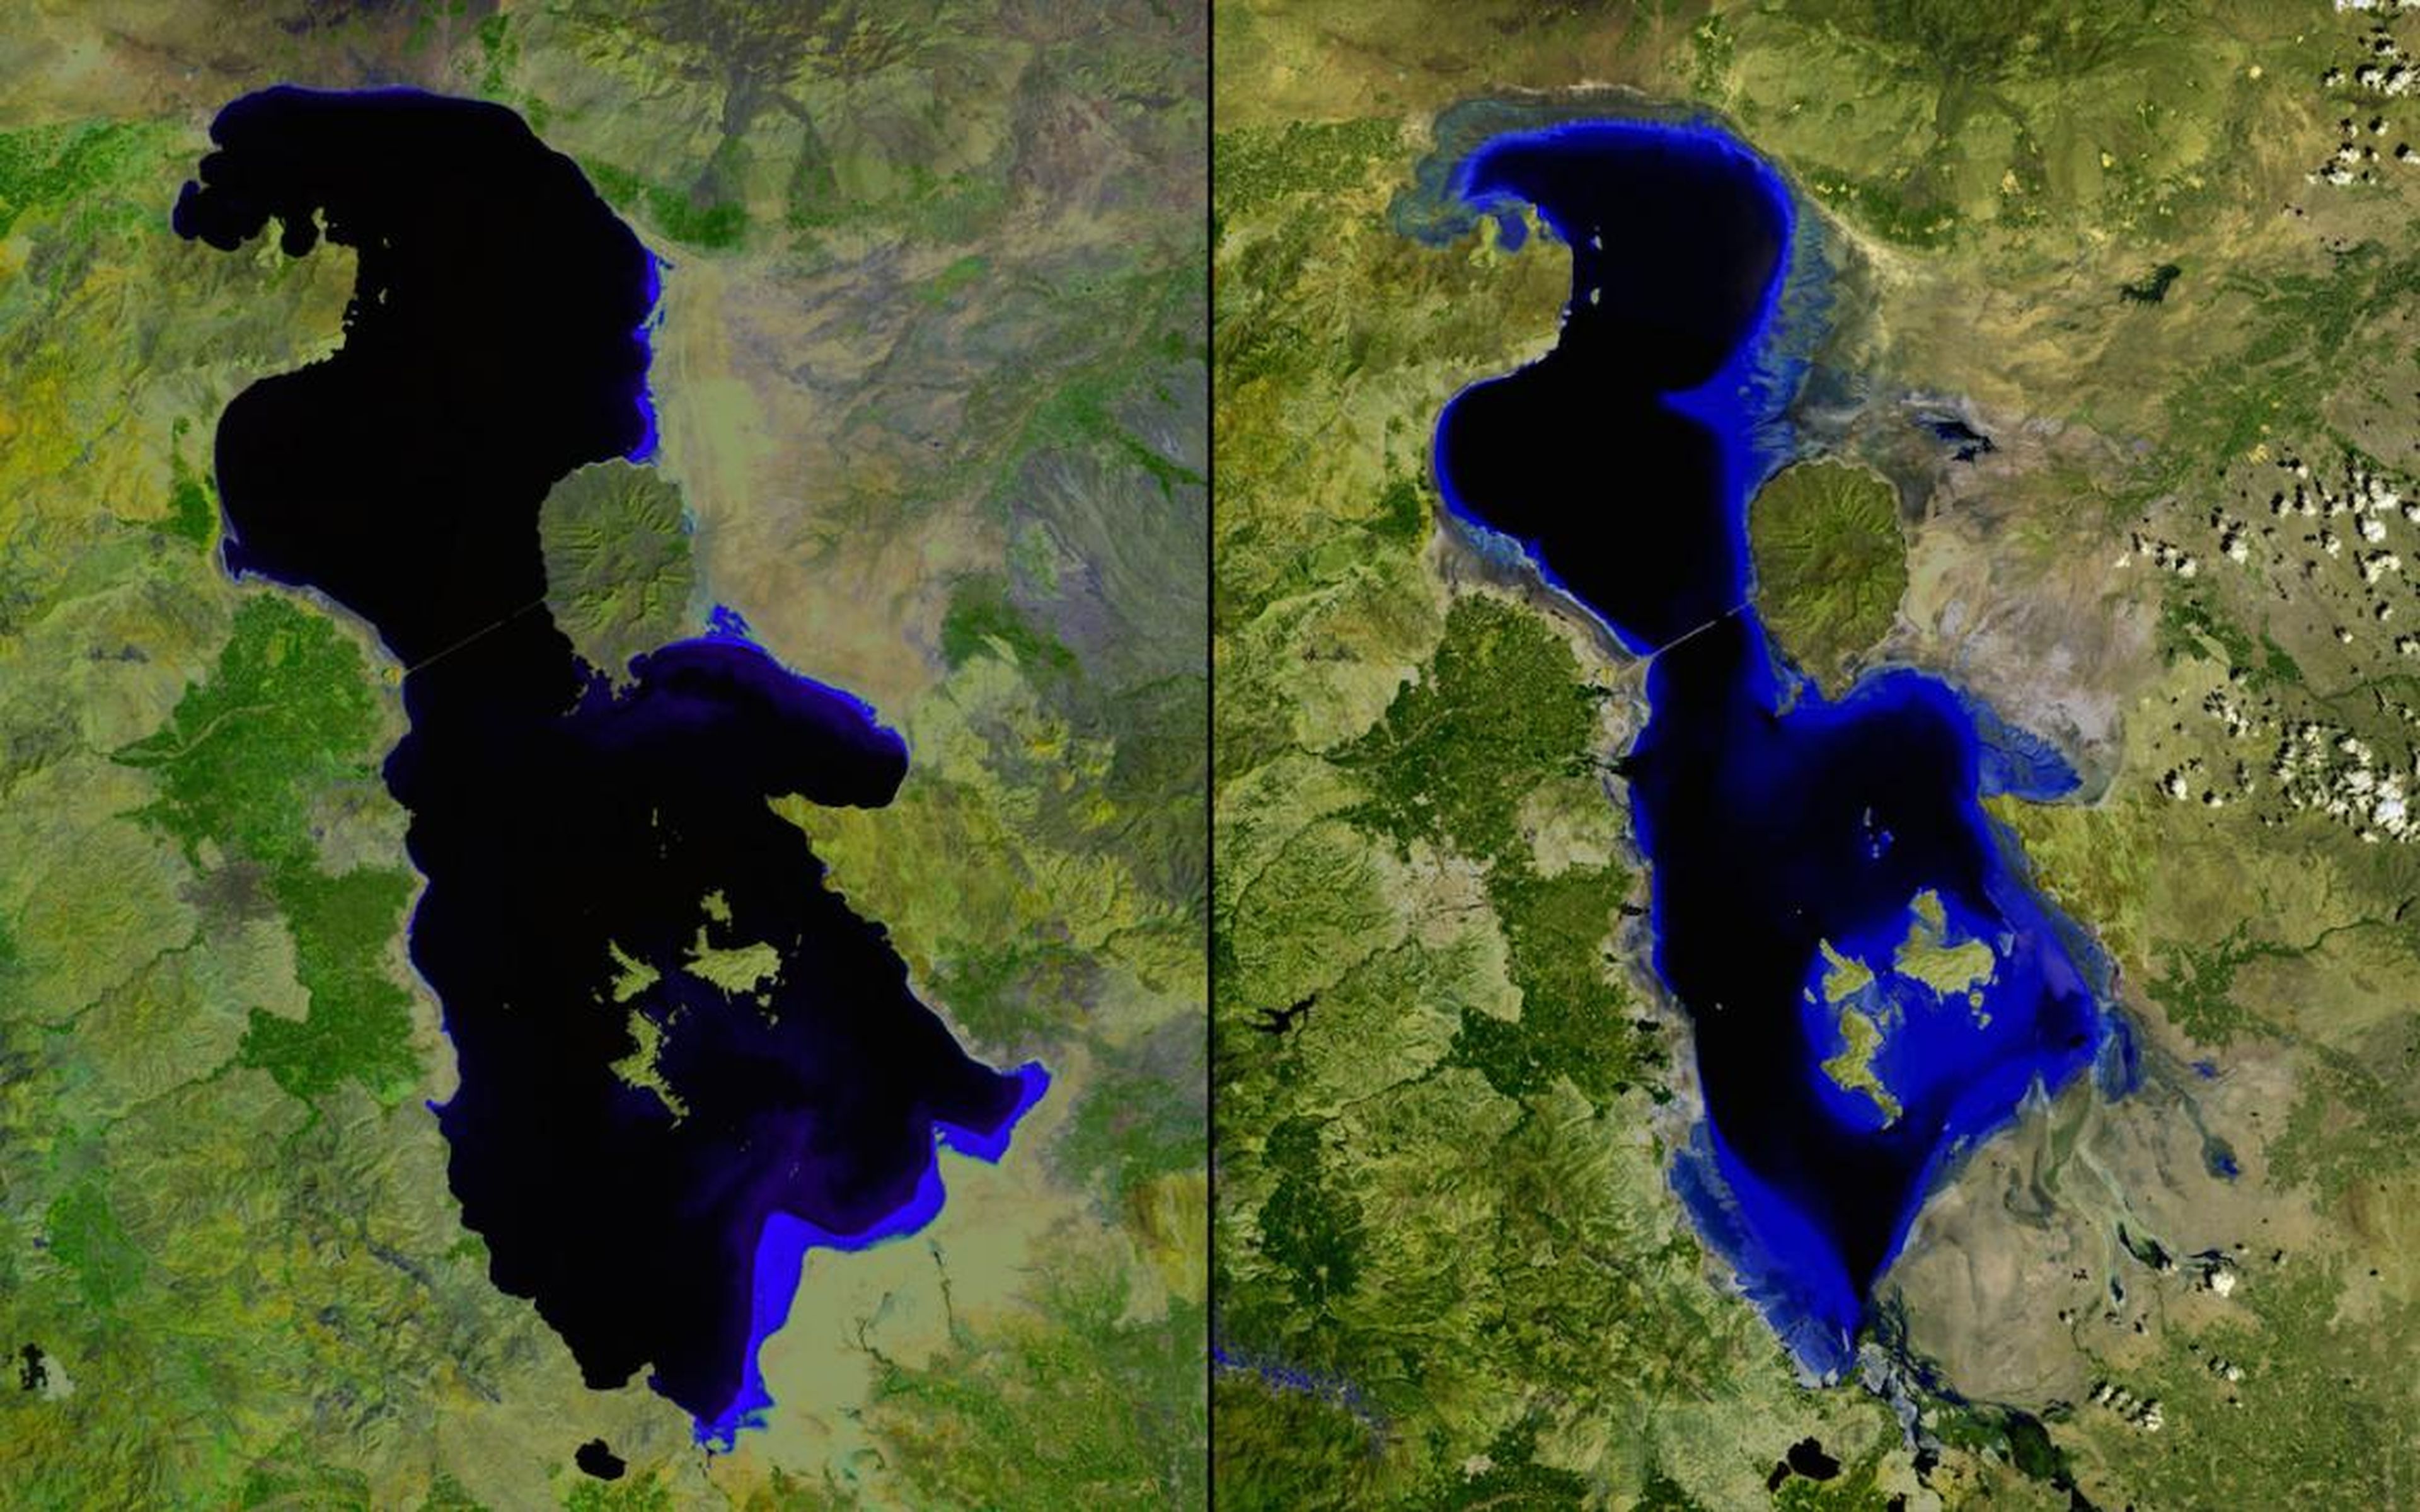 Iran's shrinking Lake Urmia is pictured below in July 2000 (left) and again in the same month in 2013 (right).